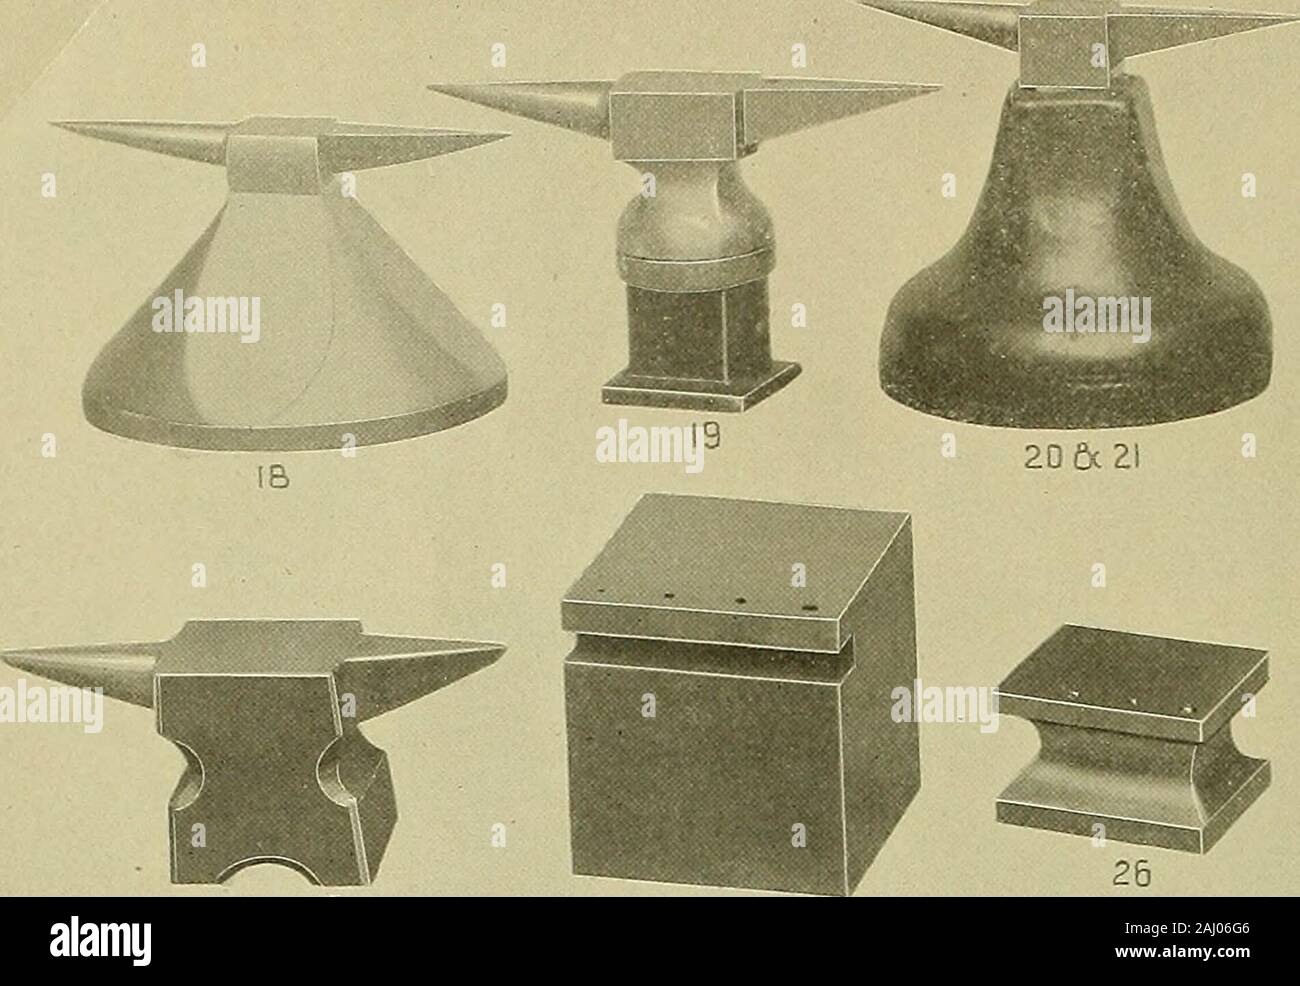 20th century catalogue of supplies for watchmakers, jewelers and kindred trades . ANVILS. Steel. No. 1. Anvil $0.35 2. nickel-plated 50 3. 25 4. nickel-plated 35 5. Hurn, 4-in 50 5N. 4 nickel-plated 70 6. 5 60 6N. 5 nickel-plated 80 7. and Stake 75 8. nickel-plated 90 9. 00 10. nickel-plated 75 Nos. 11 to 14, Square Anvils, polished face, ex-tra liard. No. 11.12.13.14.15.l(i.17. 1J41% ??2 Anvil, -in. square $0.40 li^-in. face.IK ?? . Itirlov I Acid Bottles see Classification B Alcohol Cups . .. .see Classification C Asjay Testers see Classification G *• I Adjusters, Movement. ?• M Asbestos - S Stock Photo